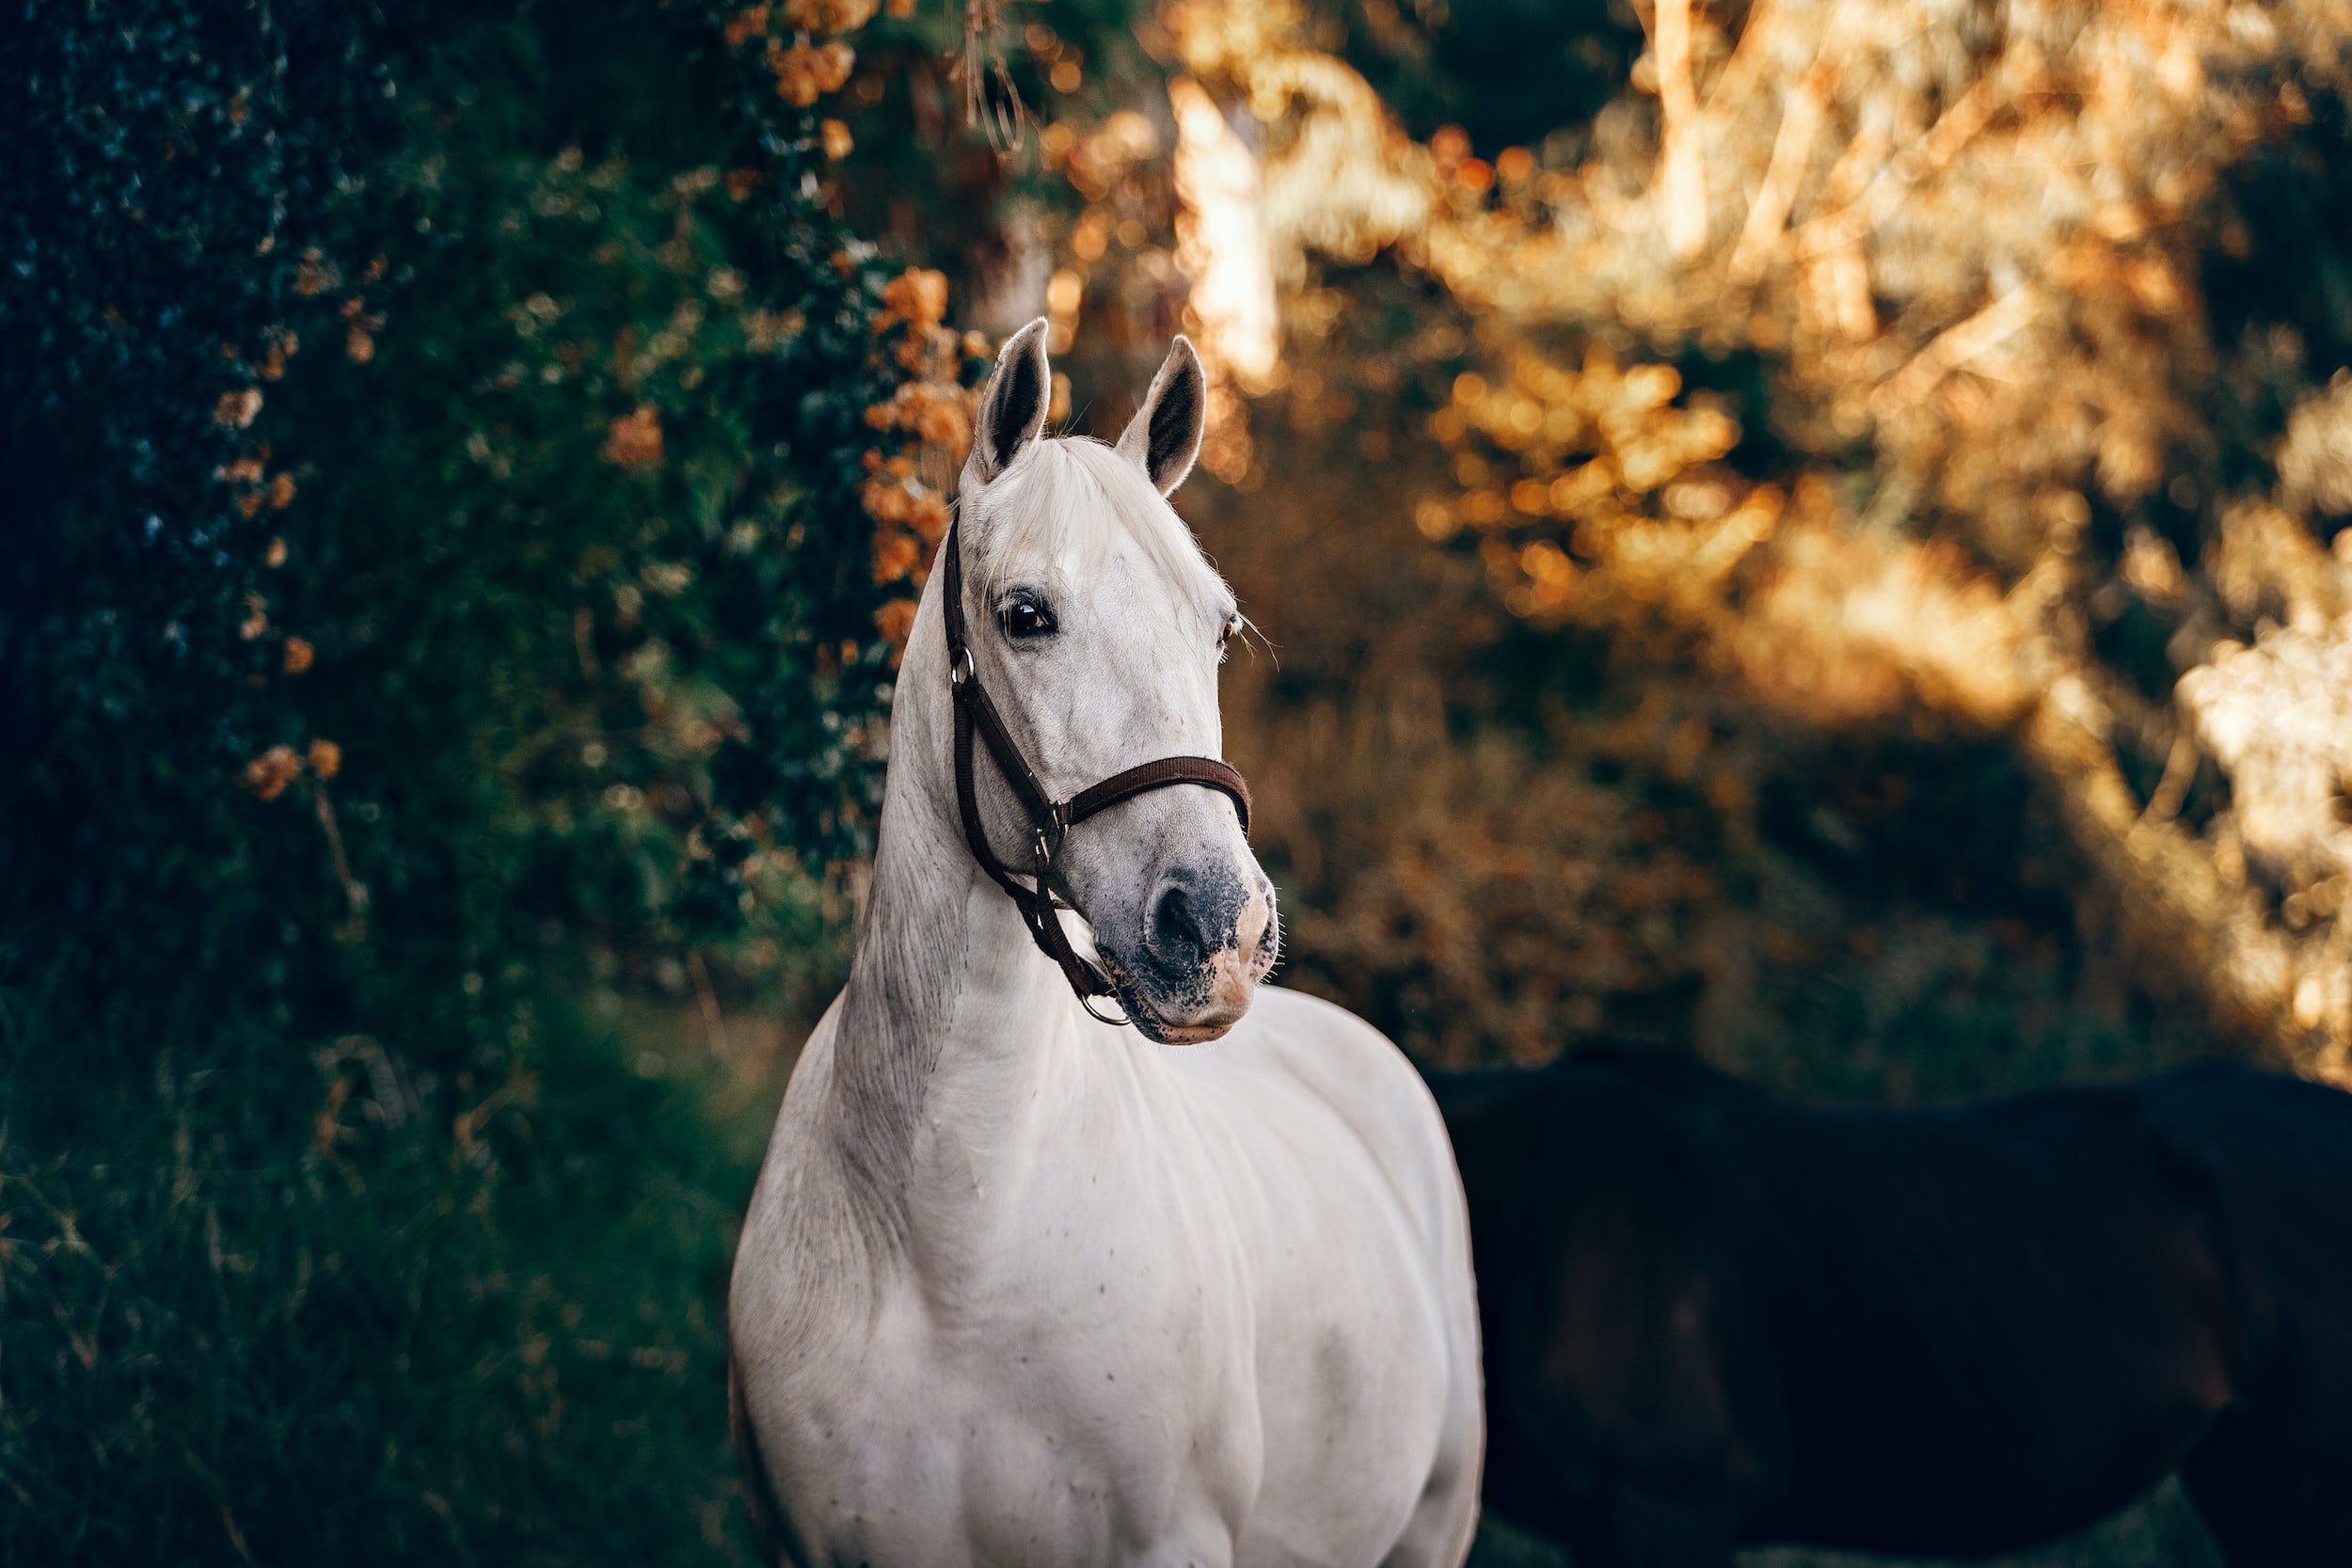 Italy evaluates cannabinoid receptor expression in the metacarpophalangeal joint of horses